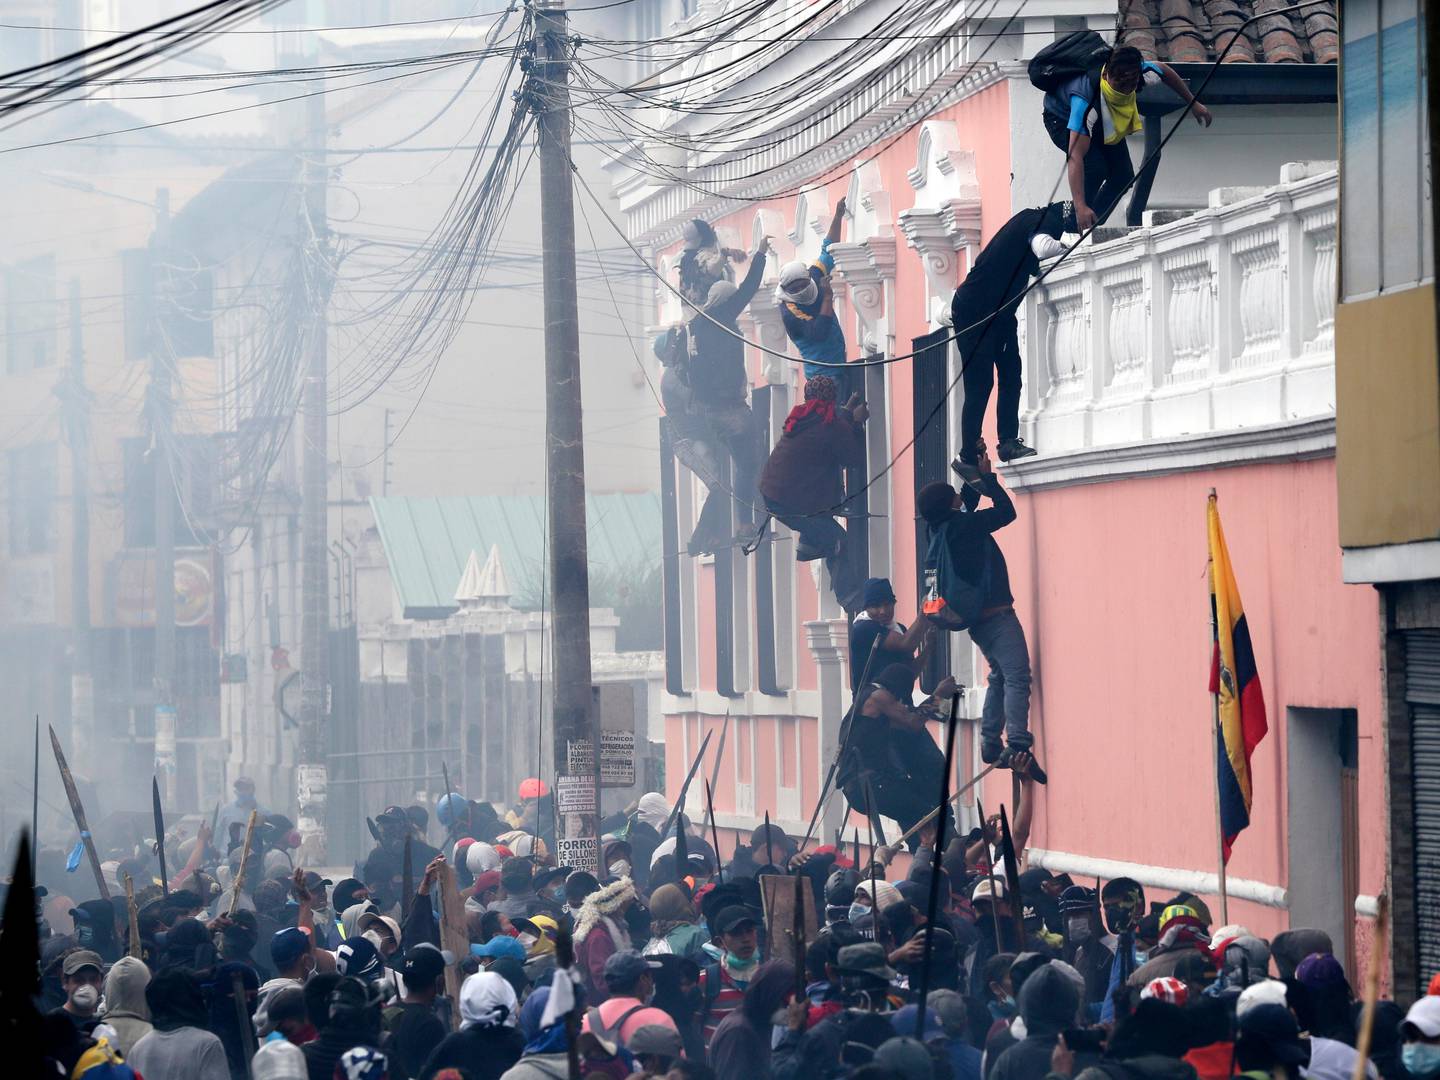 Anti-government demonstrators scale the facade of a residence to reach the rooftop, looking for a better vantage point to battle with police, in Quito, Ecuador, Friday, Oct. 11, 2019. Protests, which began when President Lenin Moreno's decision to cut subsidies led to a sharp increase in fuel prices, persisted for days. (AP Photo/Dolores Ochoa)